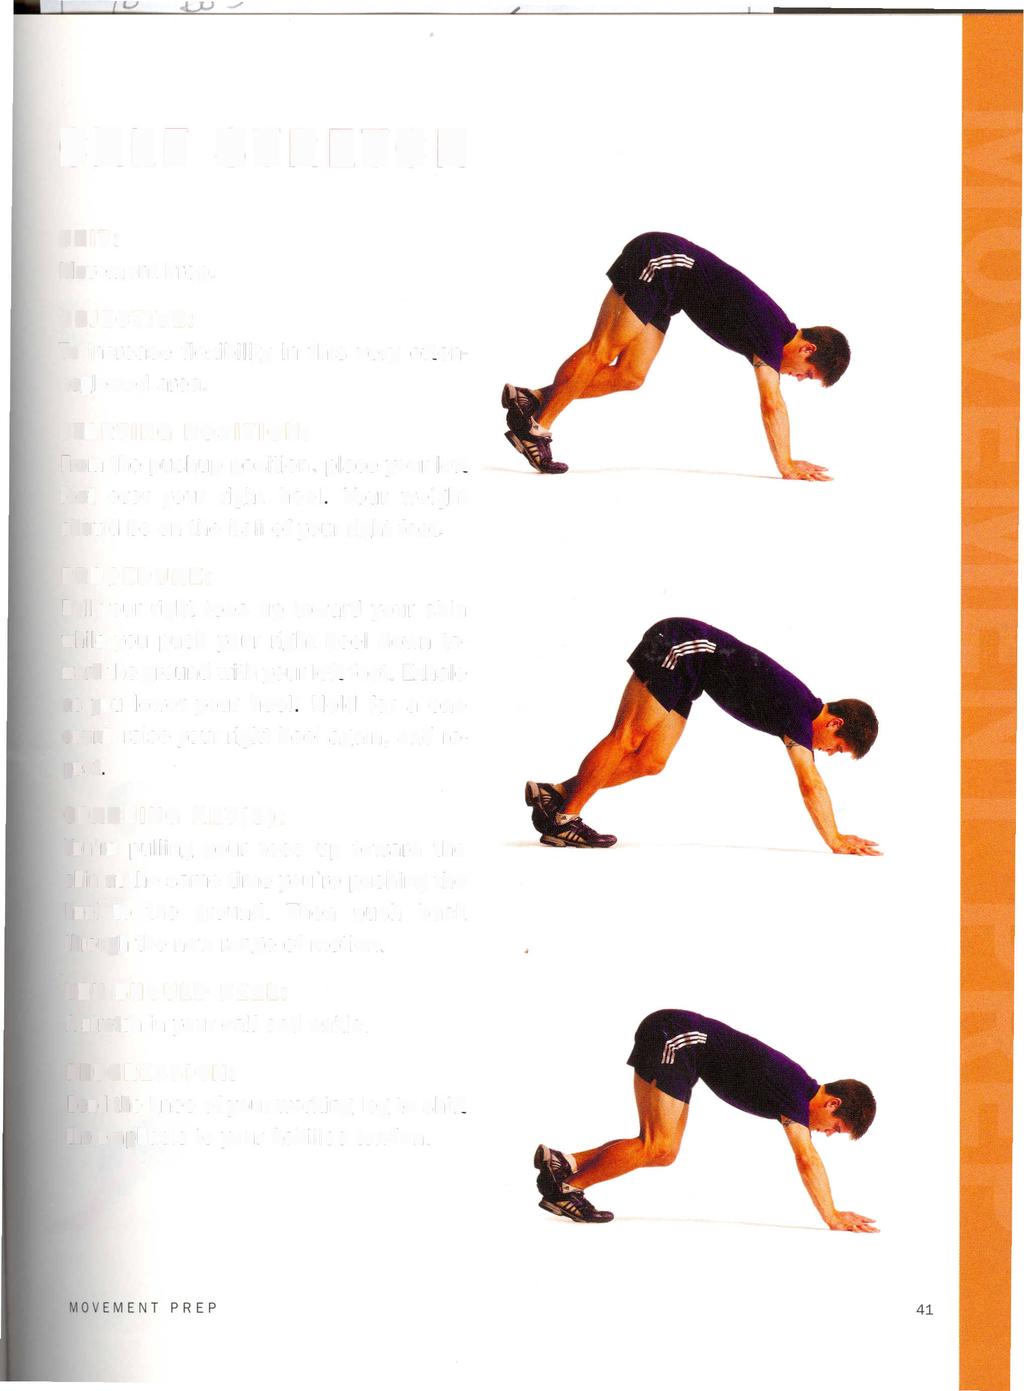 CALF STRETCH To increase flexibility in this very oftenneglected area. STARTING POSITION: Fromthe pushup position, place your left foot over your right heel.